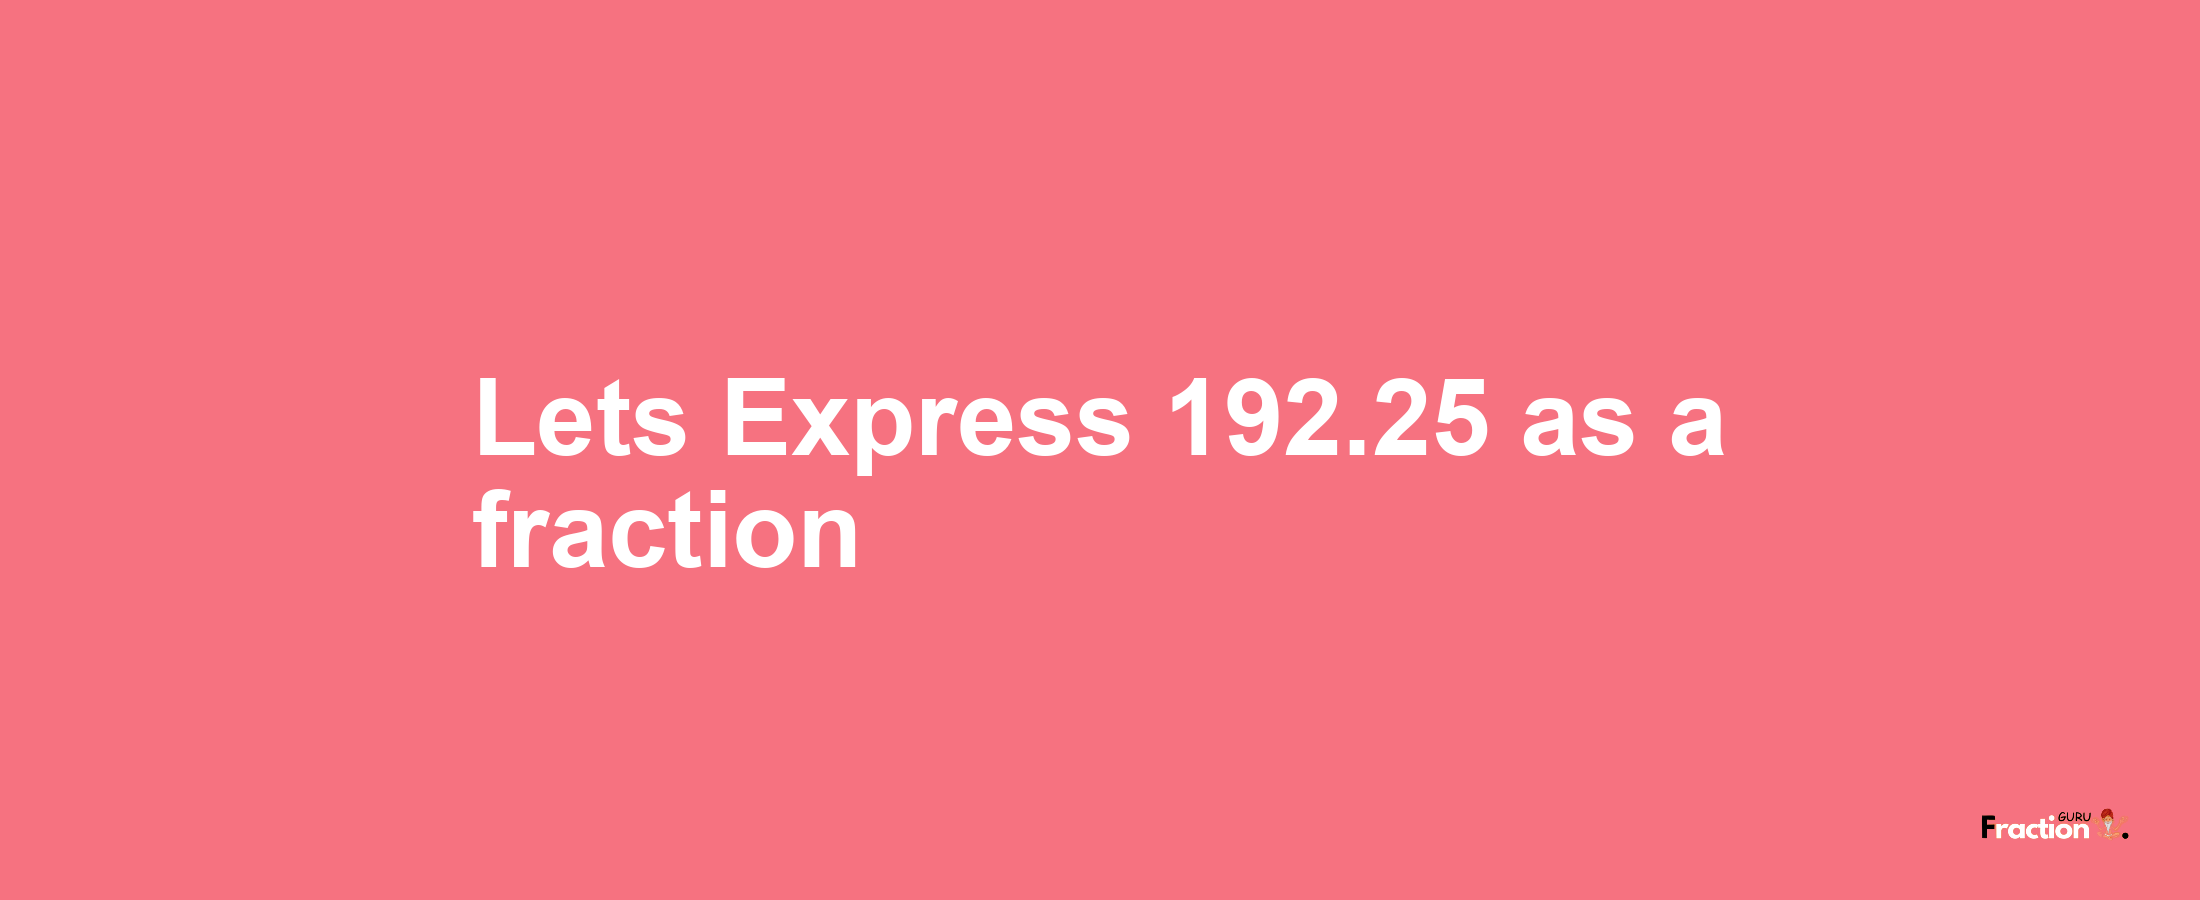 Lets Express 192.25 as afraction